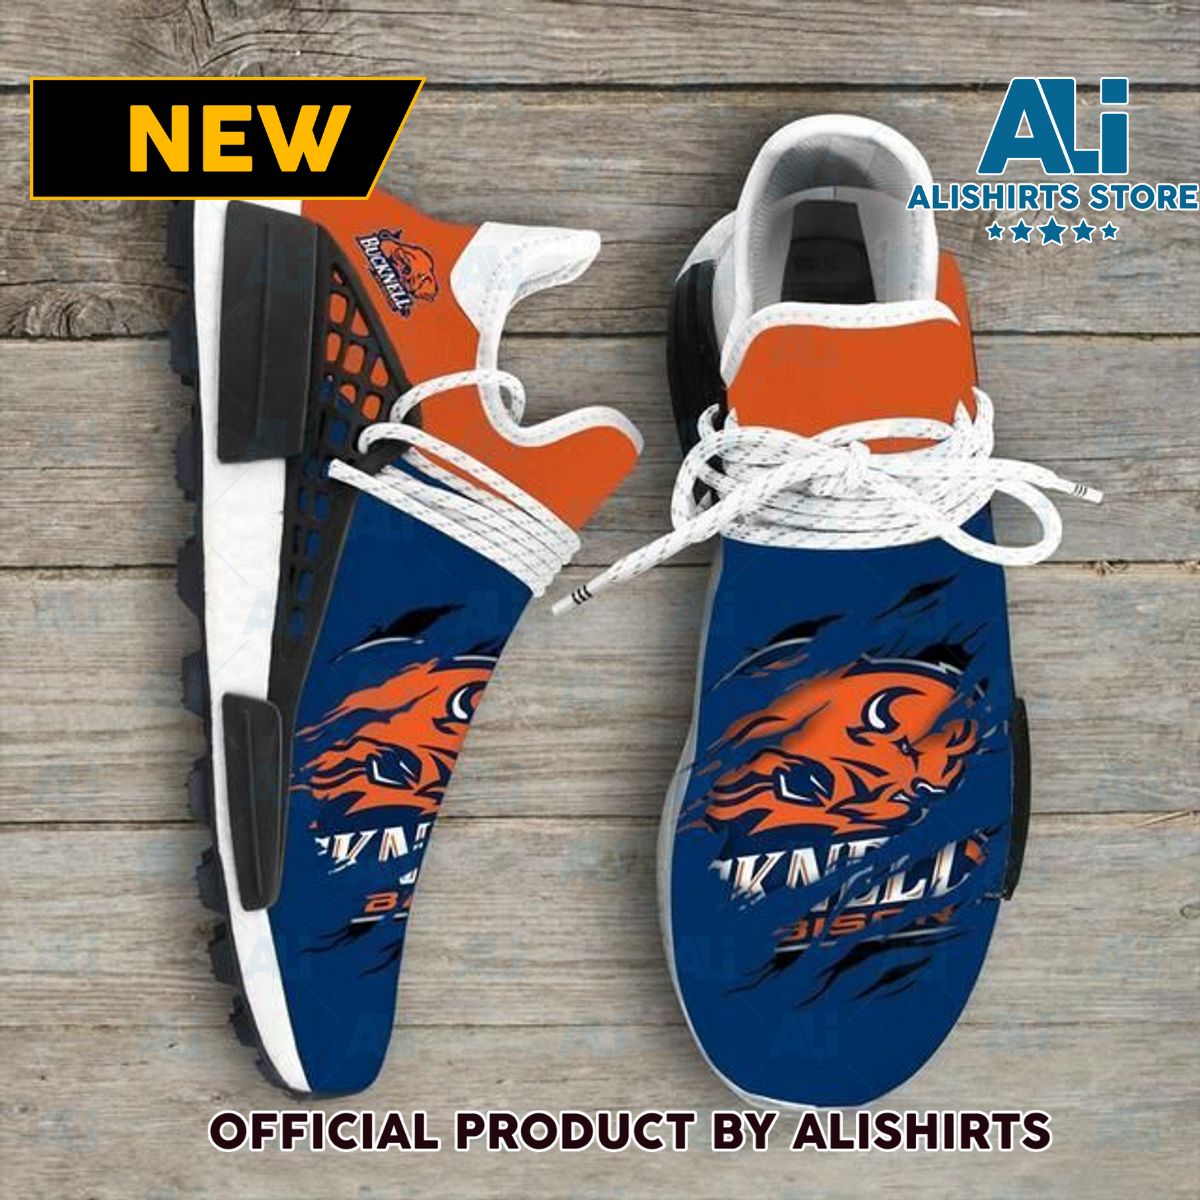 Bucknell Bison Ncaa NMD Human Race shoes Customized Adidas NMD Sneakers